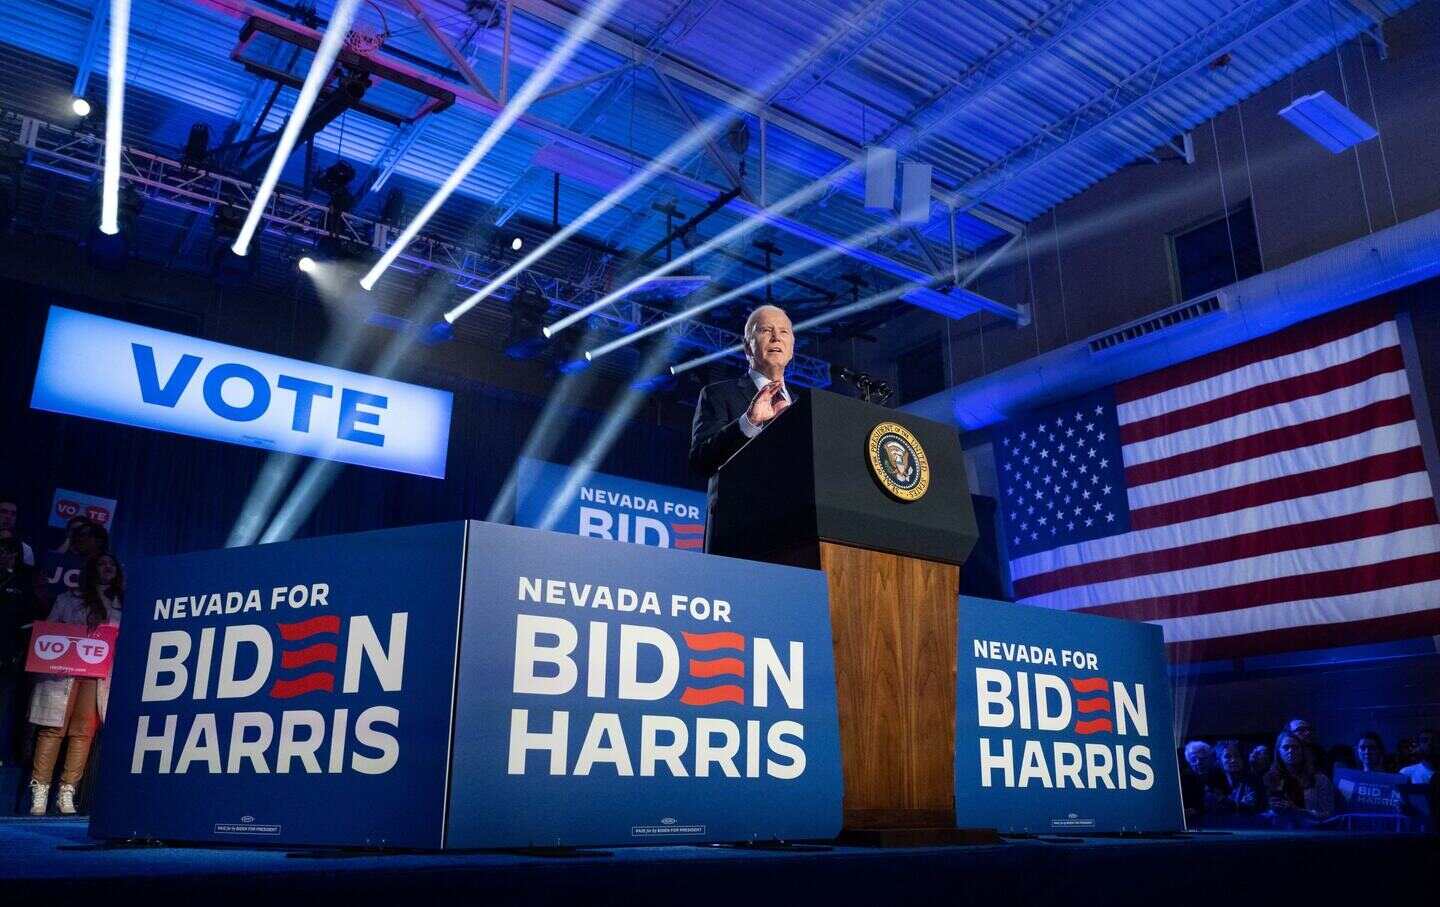 Joe Biden spaeaks during a campaign rally at Pearson Community Center in Las Vegas, Nevada, on February 4, 2024.